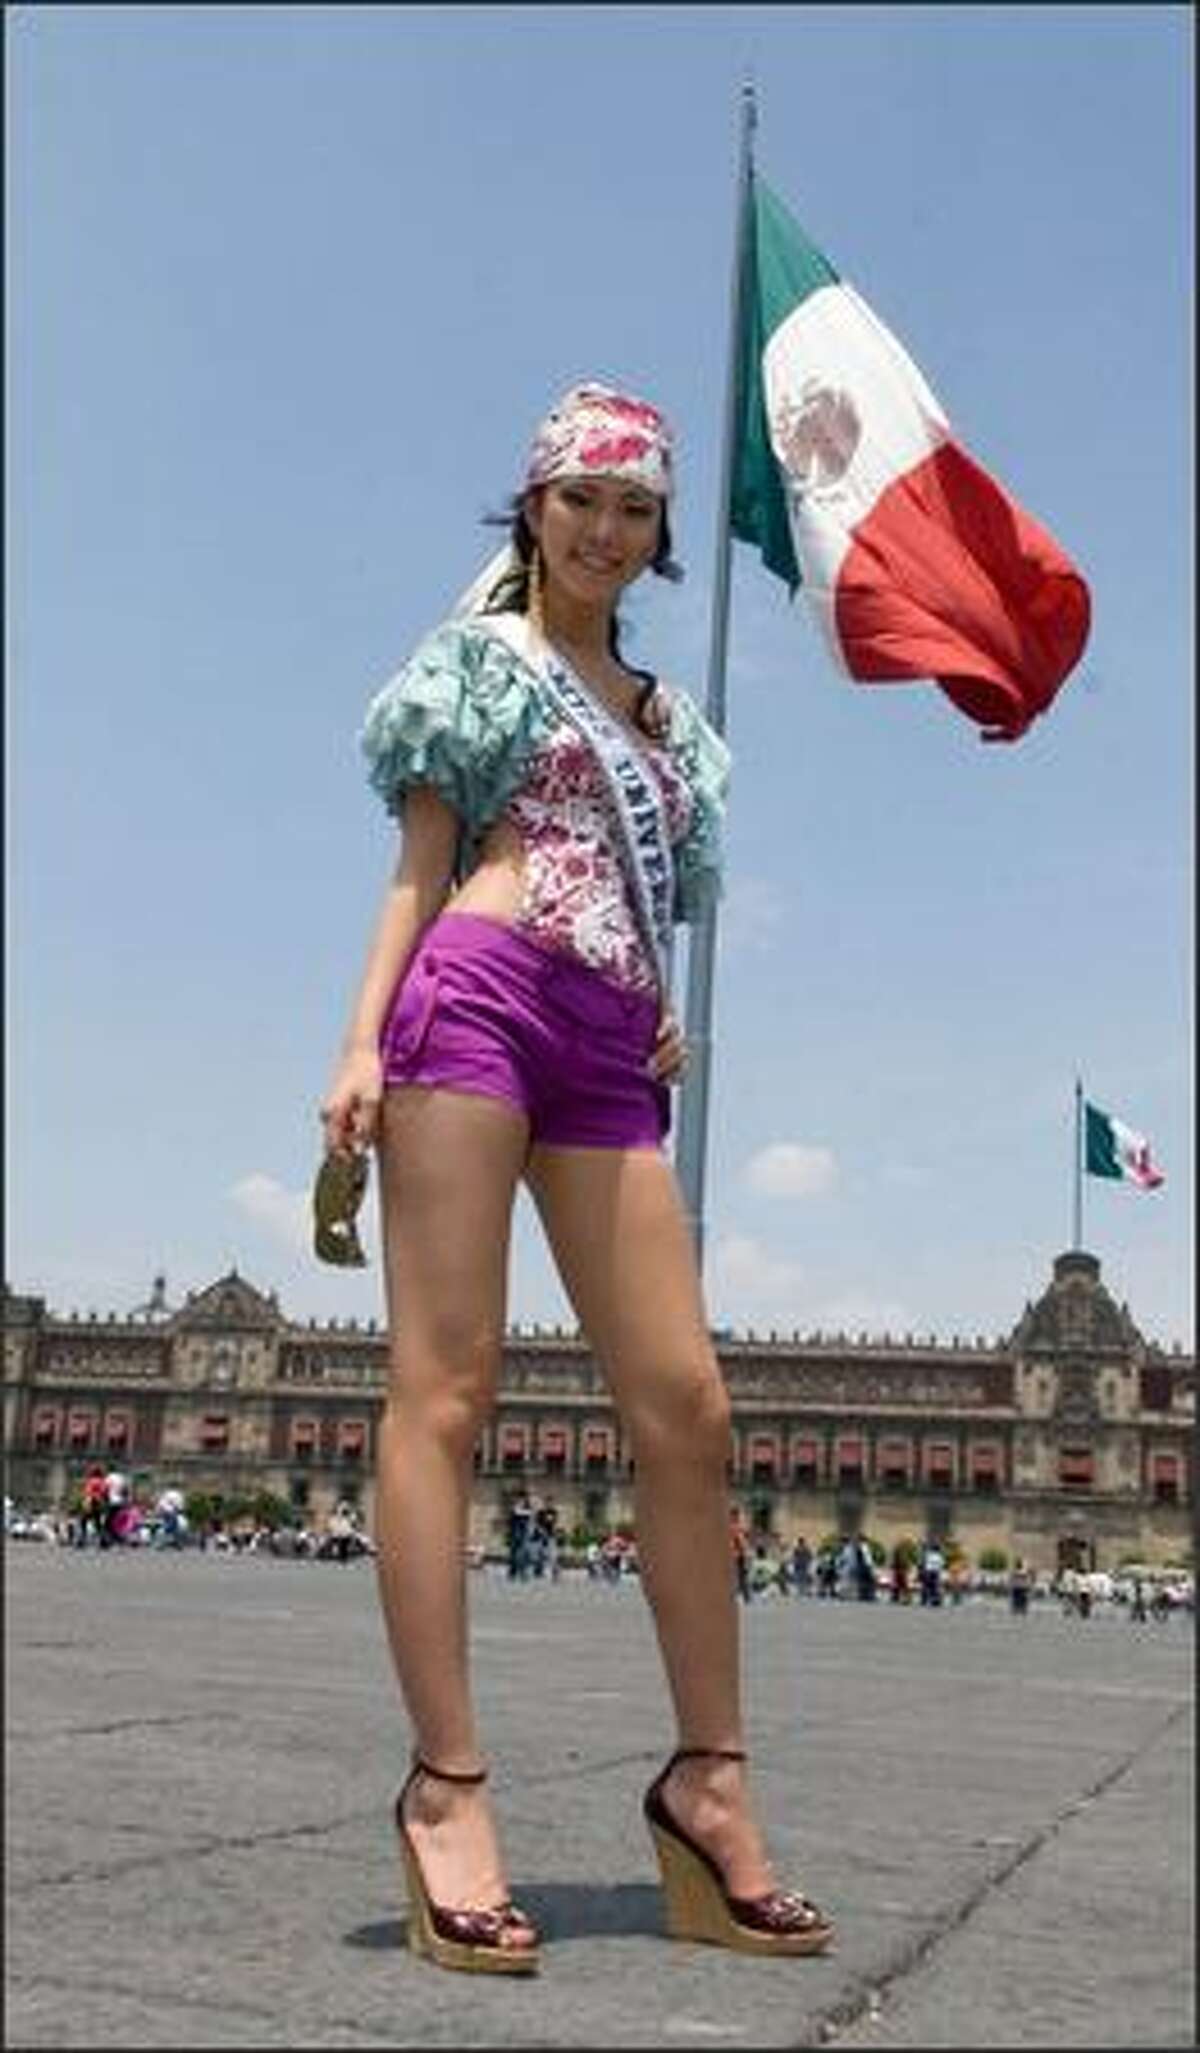 Riyo Mori at the Zocalo. The last time Japan won the pageant was in 1959 when Akiko Kojima became the first Miss Universe from Asia.